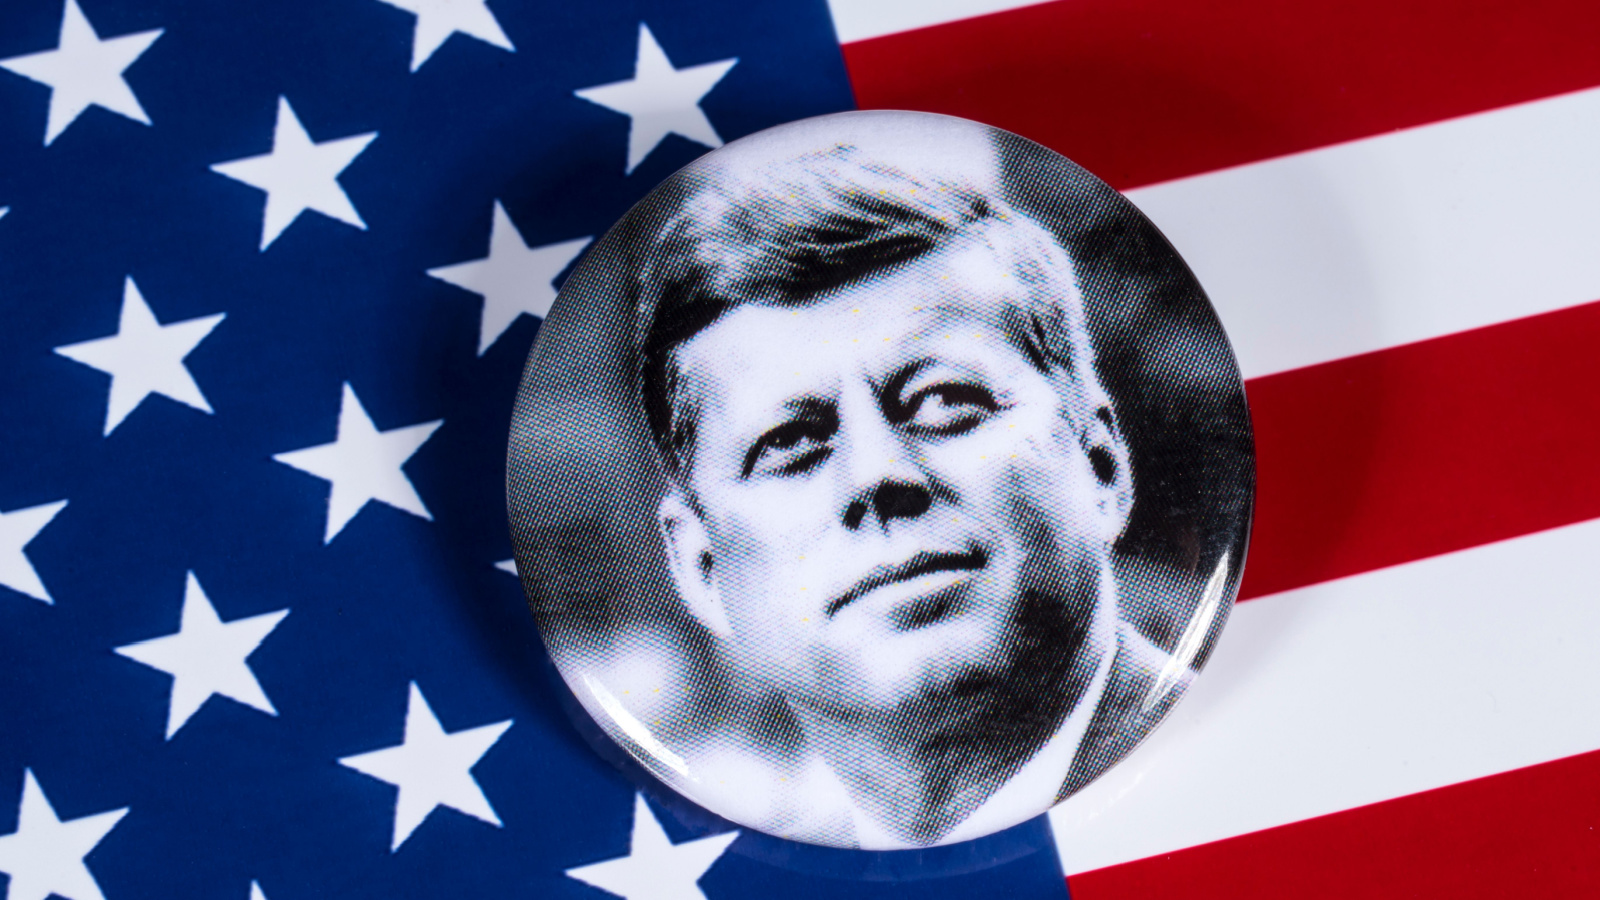 image credit: chrisdorney/Shutterstock <p><span>On January 20, 1961, John F. Kennedy delivered an inaugural speech that would be remembered for generations. He urged American citizens to contribute to the public good, famously stating, “Ask not what your country can do for you—ask what you can do for your country.” The speech is a masterful blend of idealism and patriotism. It continues to inspire public service and civic responsibility.</span></p>